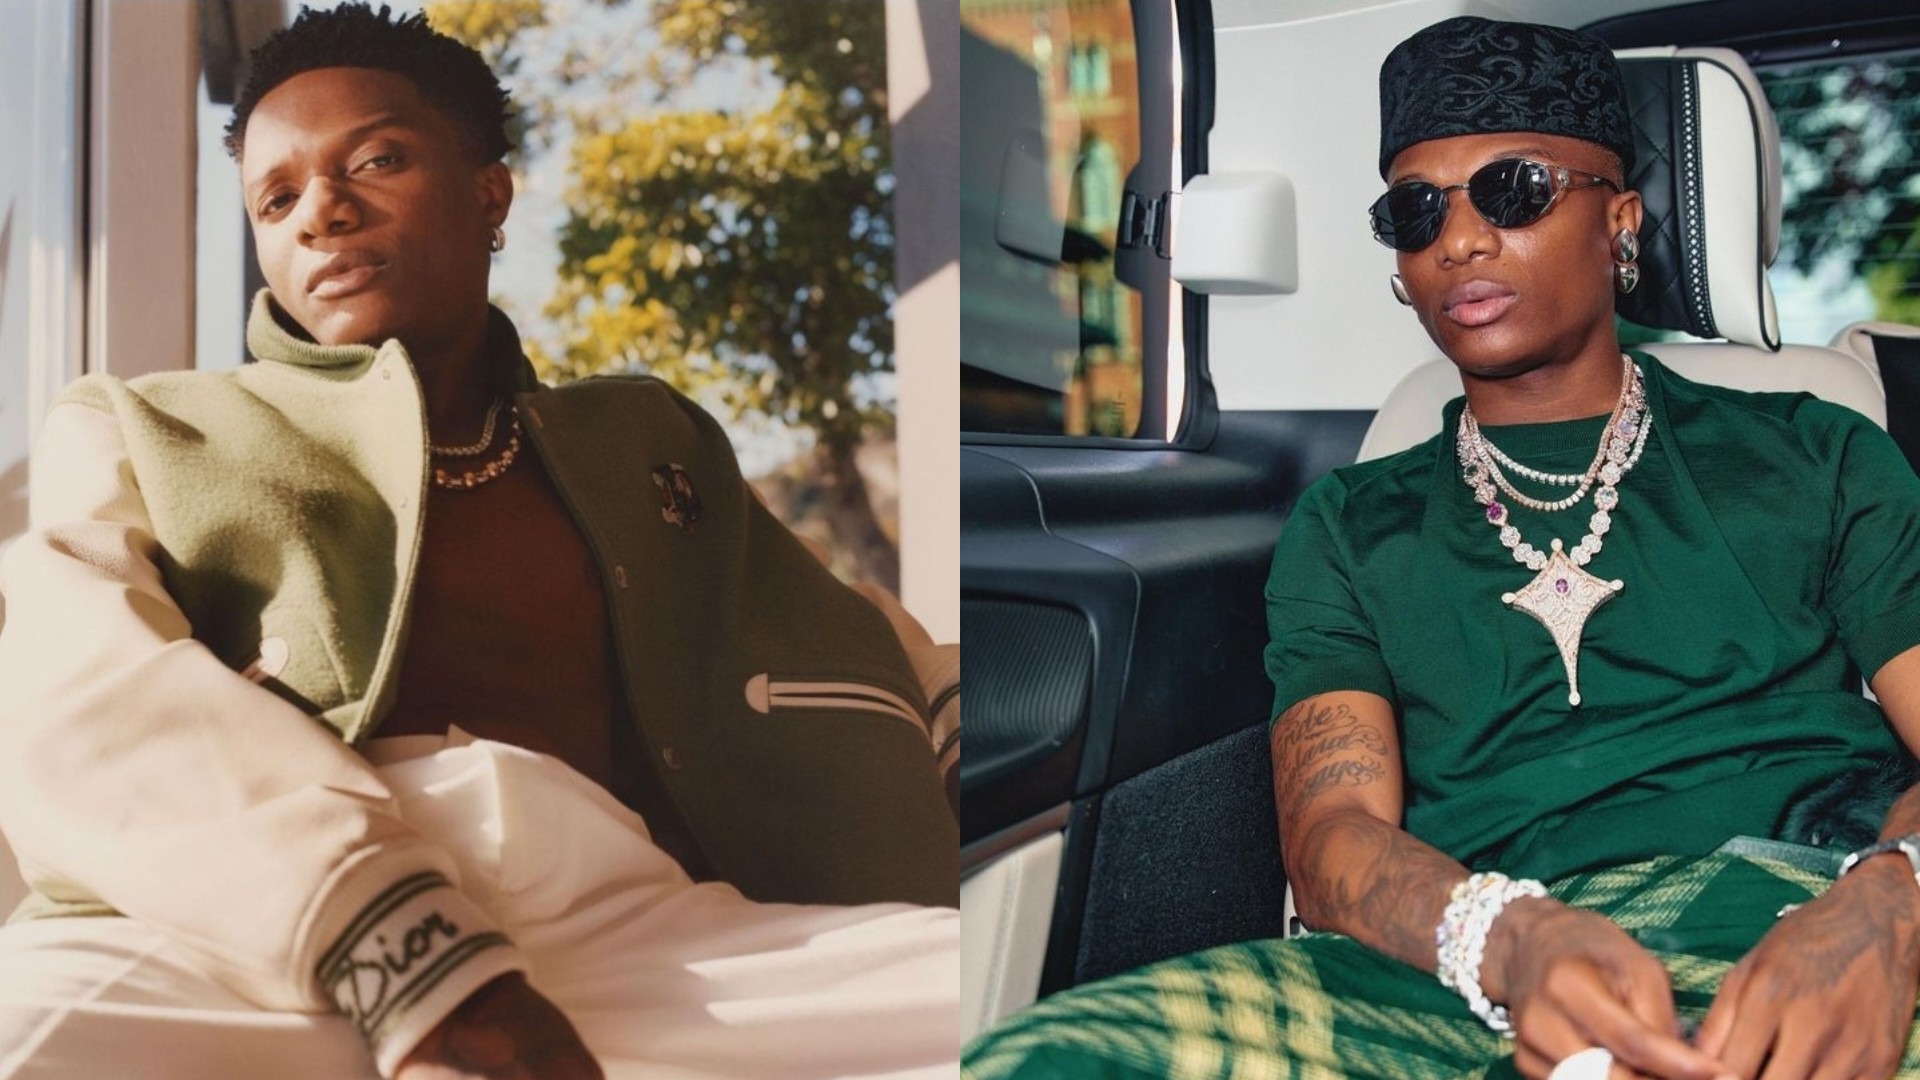 Wizkid fulfills promise, distributes N100M to children in Surulere (Video)